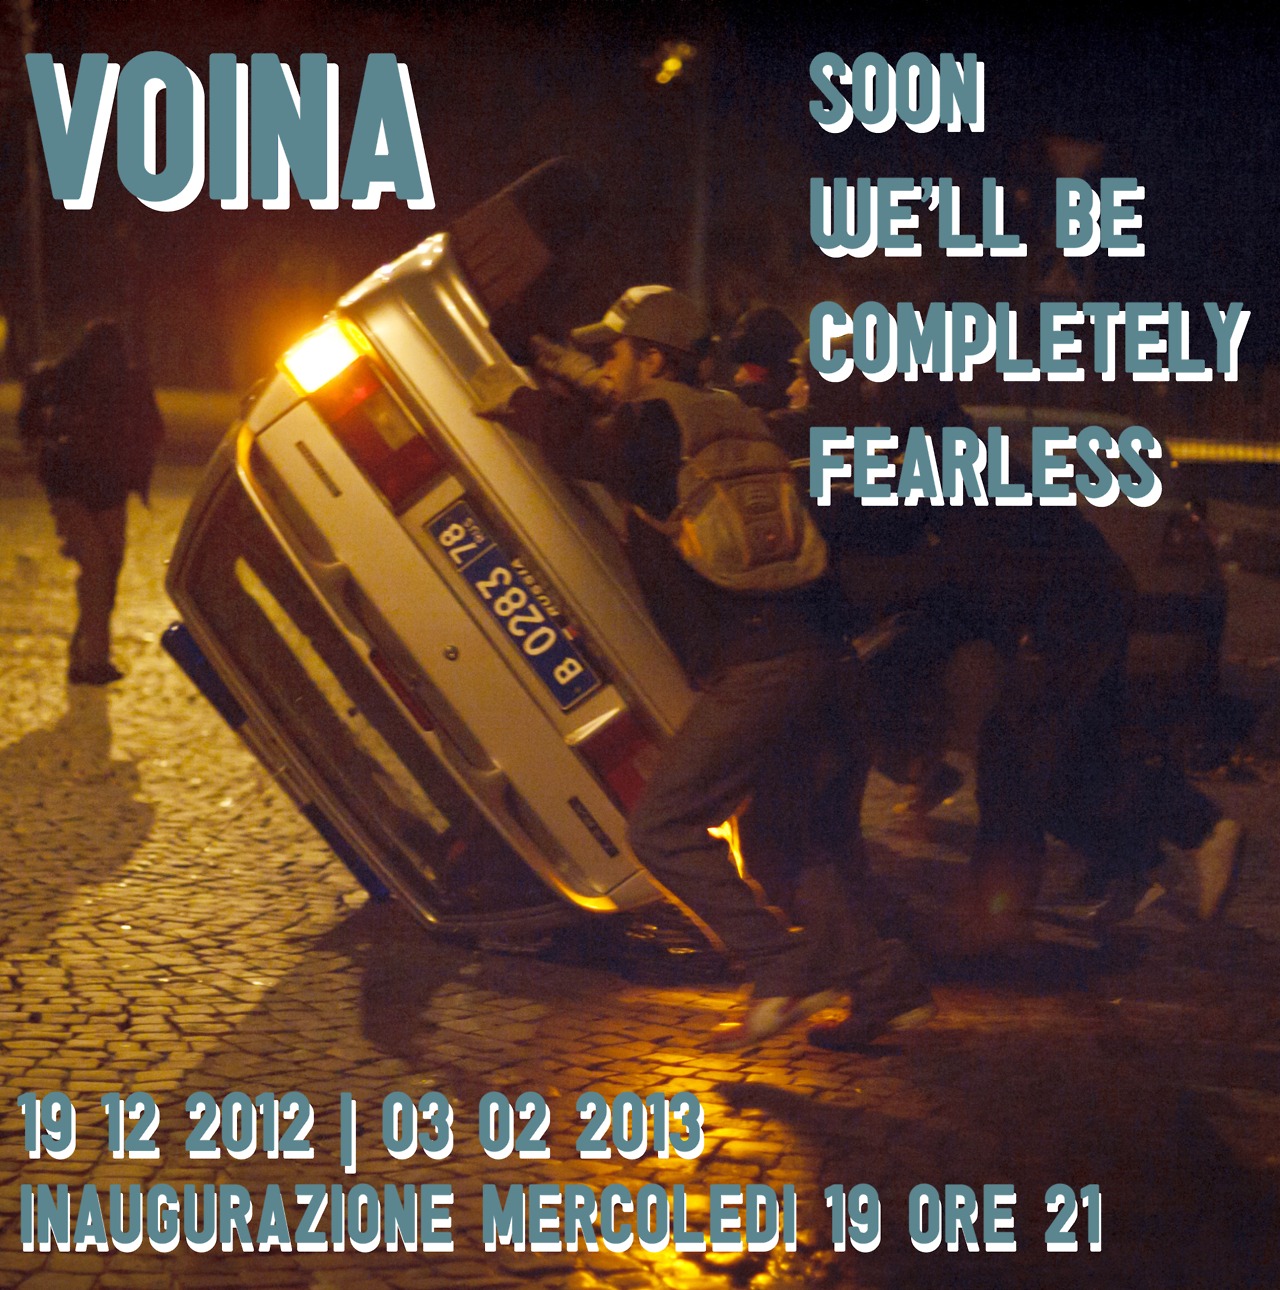 Voina – Soon we’ll be completely fearless